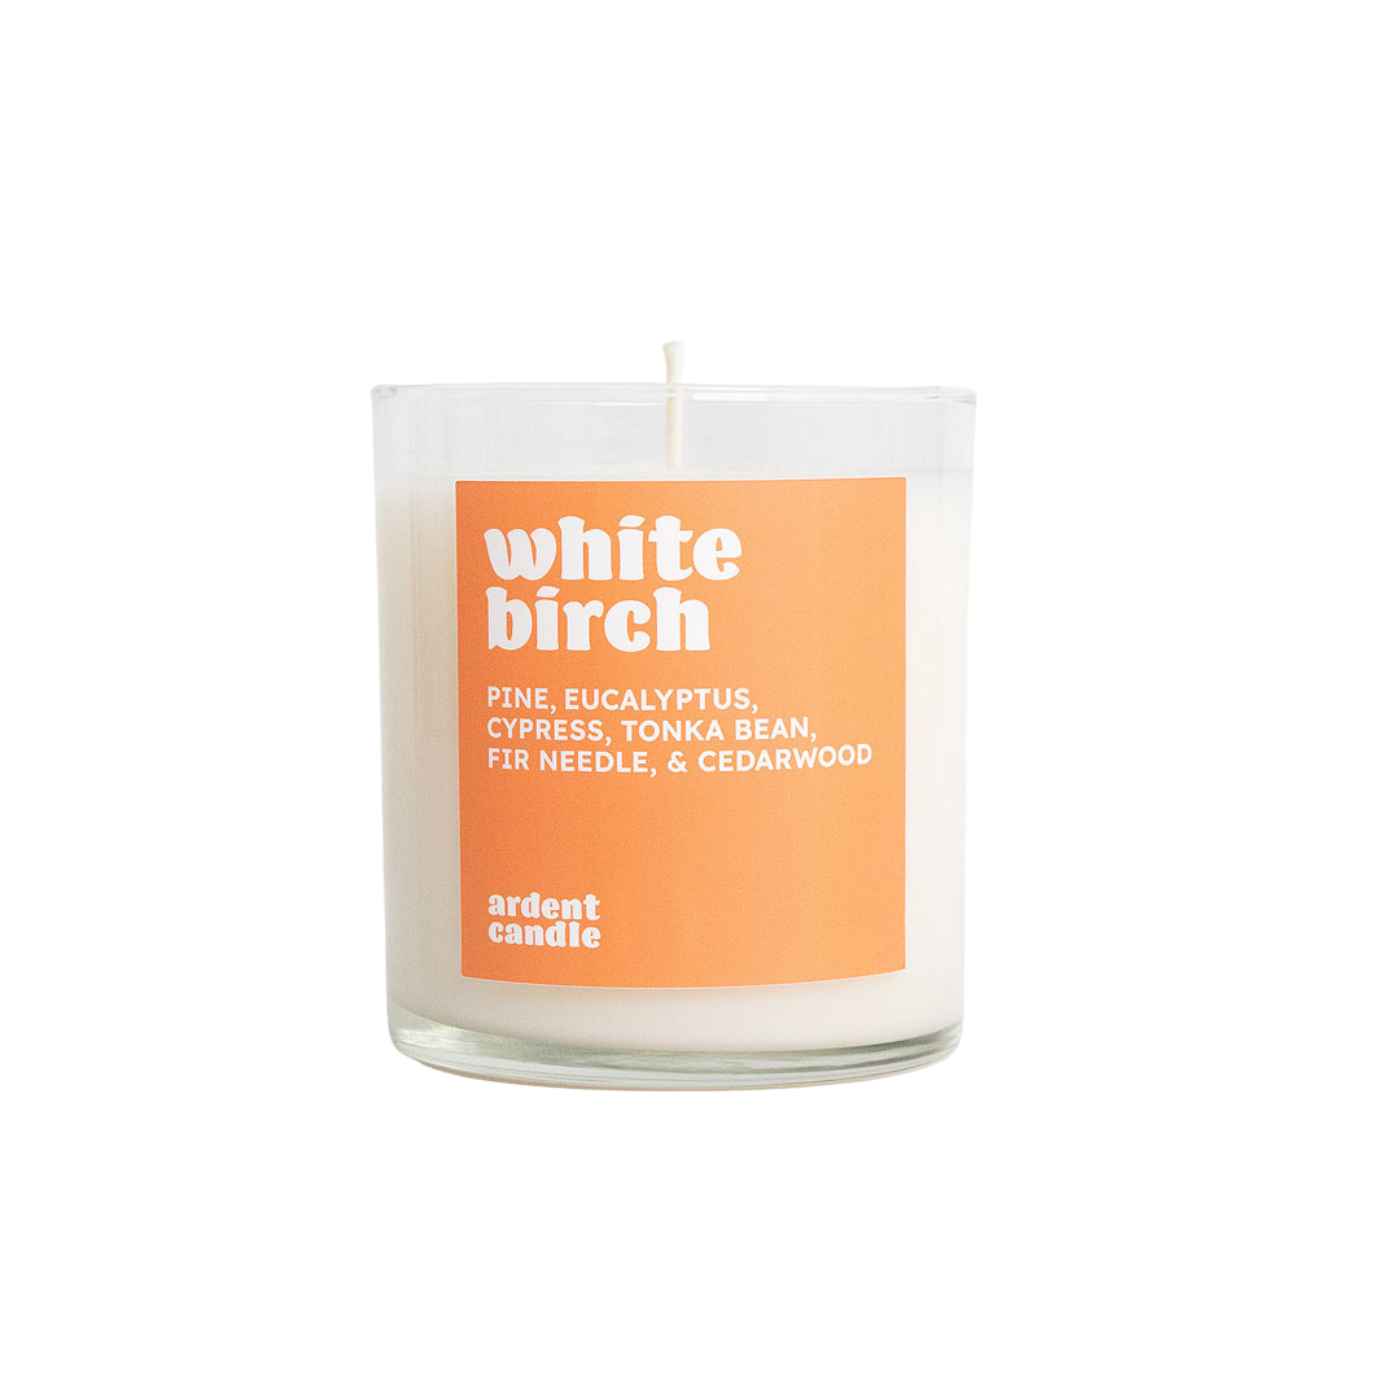 White Birch by Ardent Candle